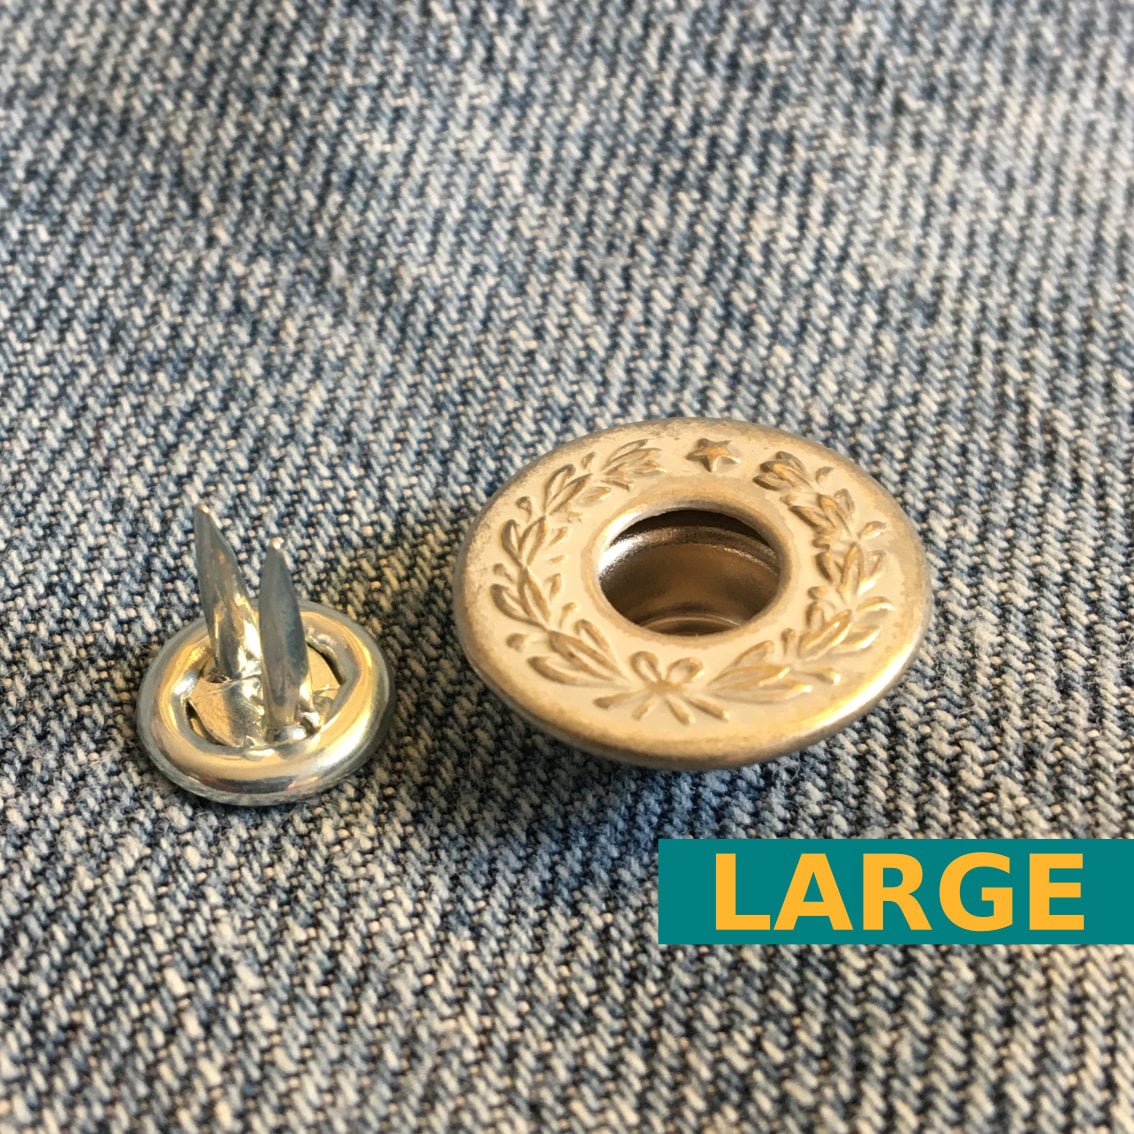 Jean Buttons 17mm Button Pins for Jeans No Sew Instant Button Detachable  Buttons Make Loose Pants Fit Perfect 